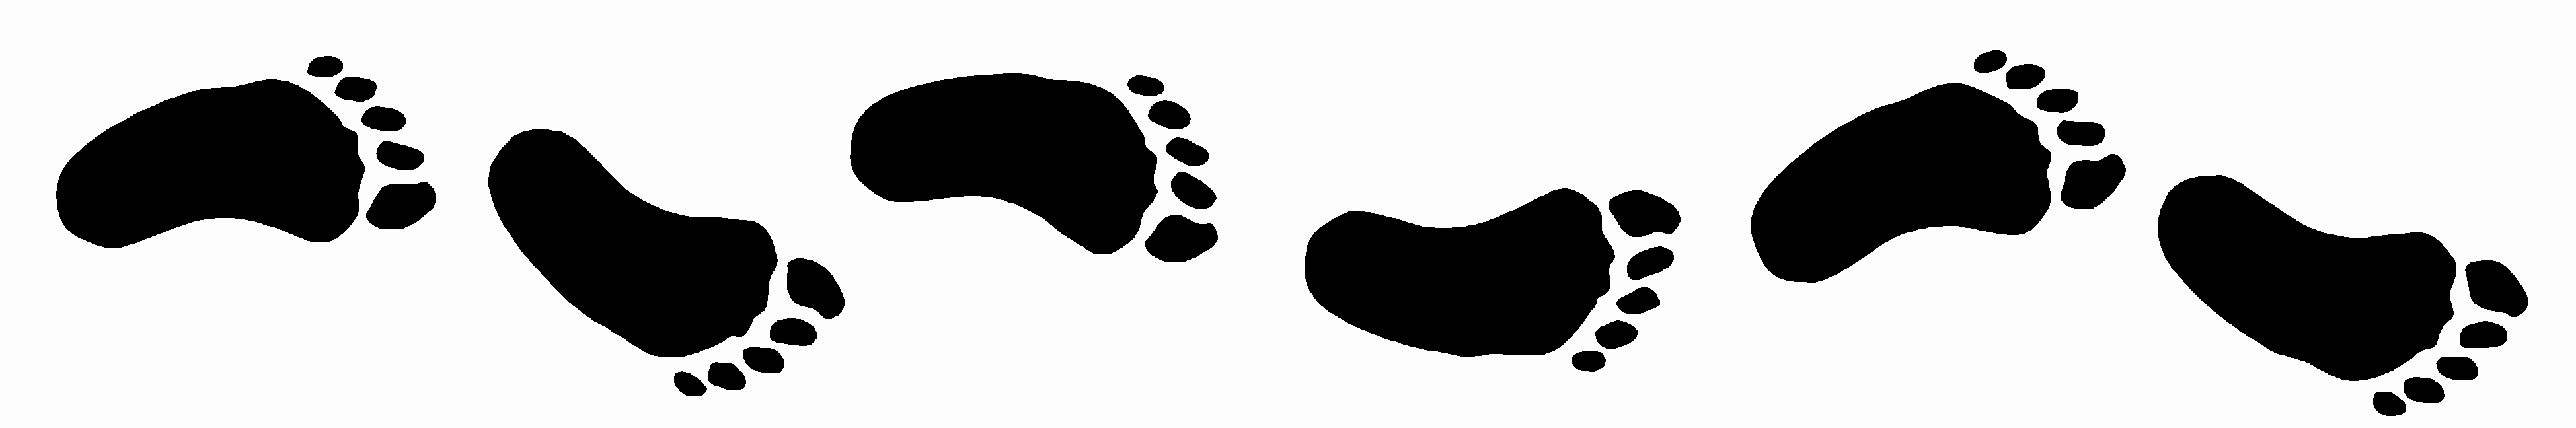 Images Of Footprints - ClipArt Best